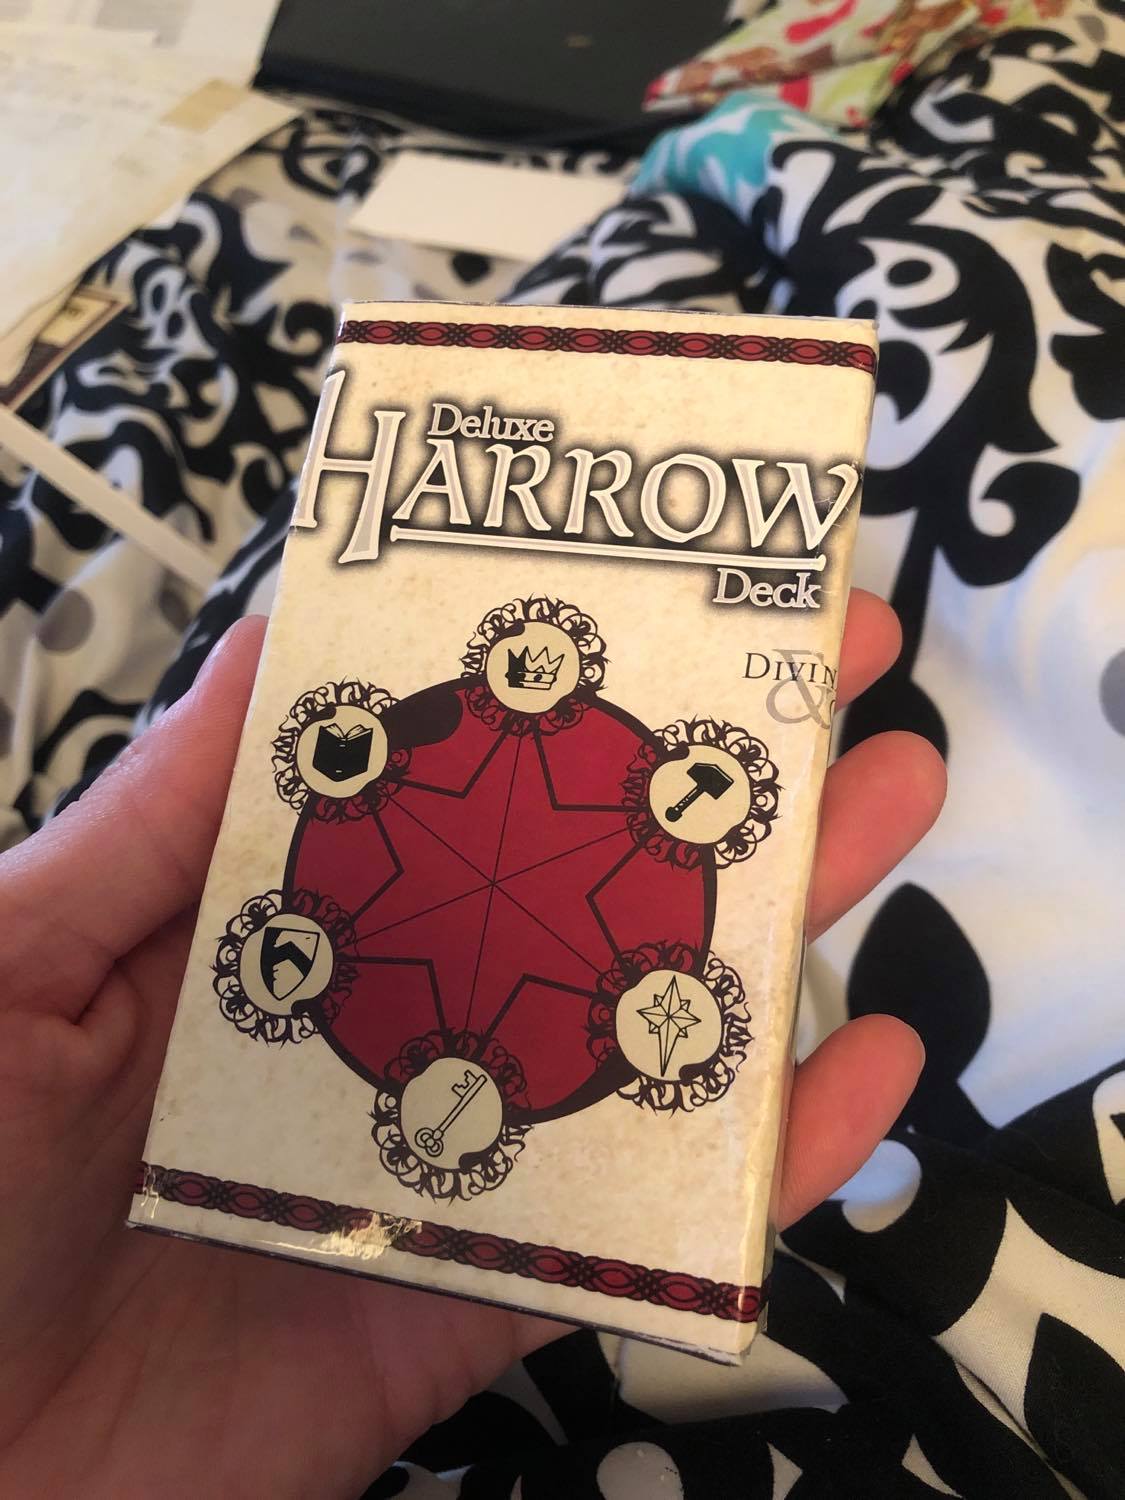 The original box modified to be one card width across. The text that says Deluxe Harrow Deck is still showing, with the logo centered in the middle